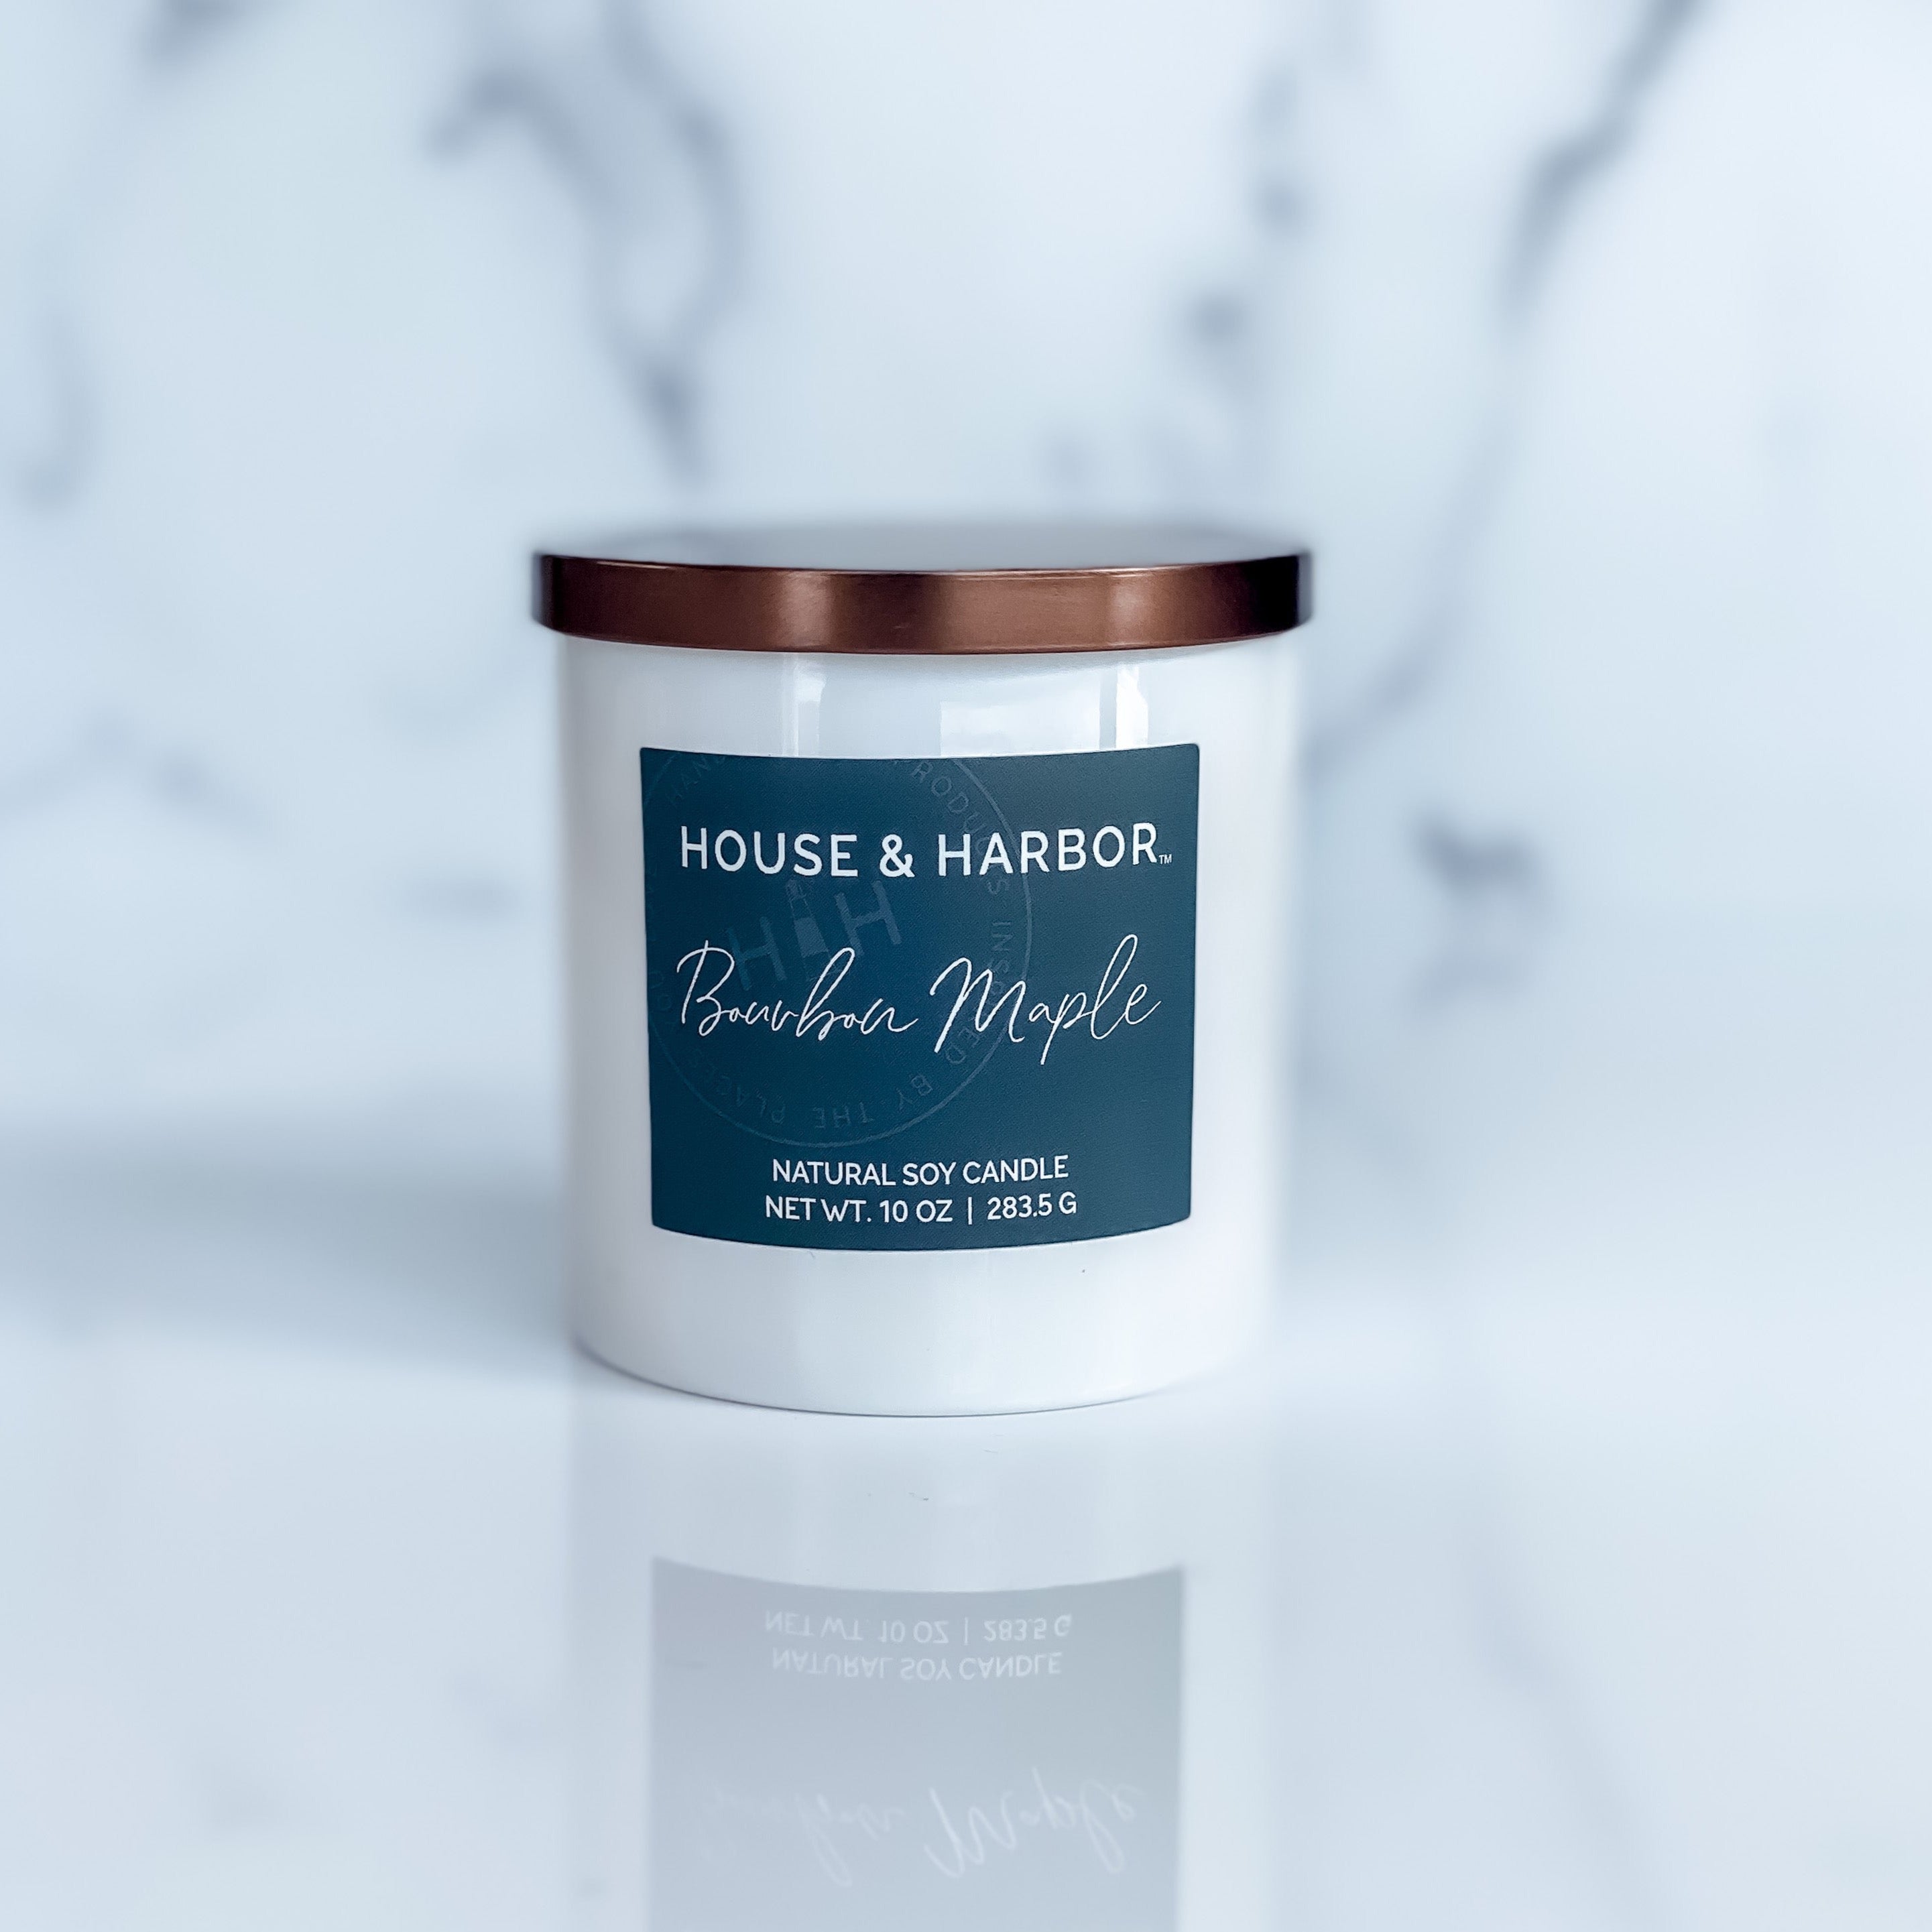 Bourbon Maple Soy Candle